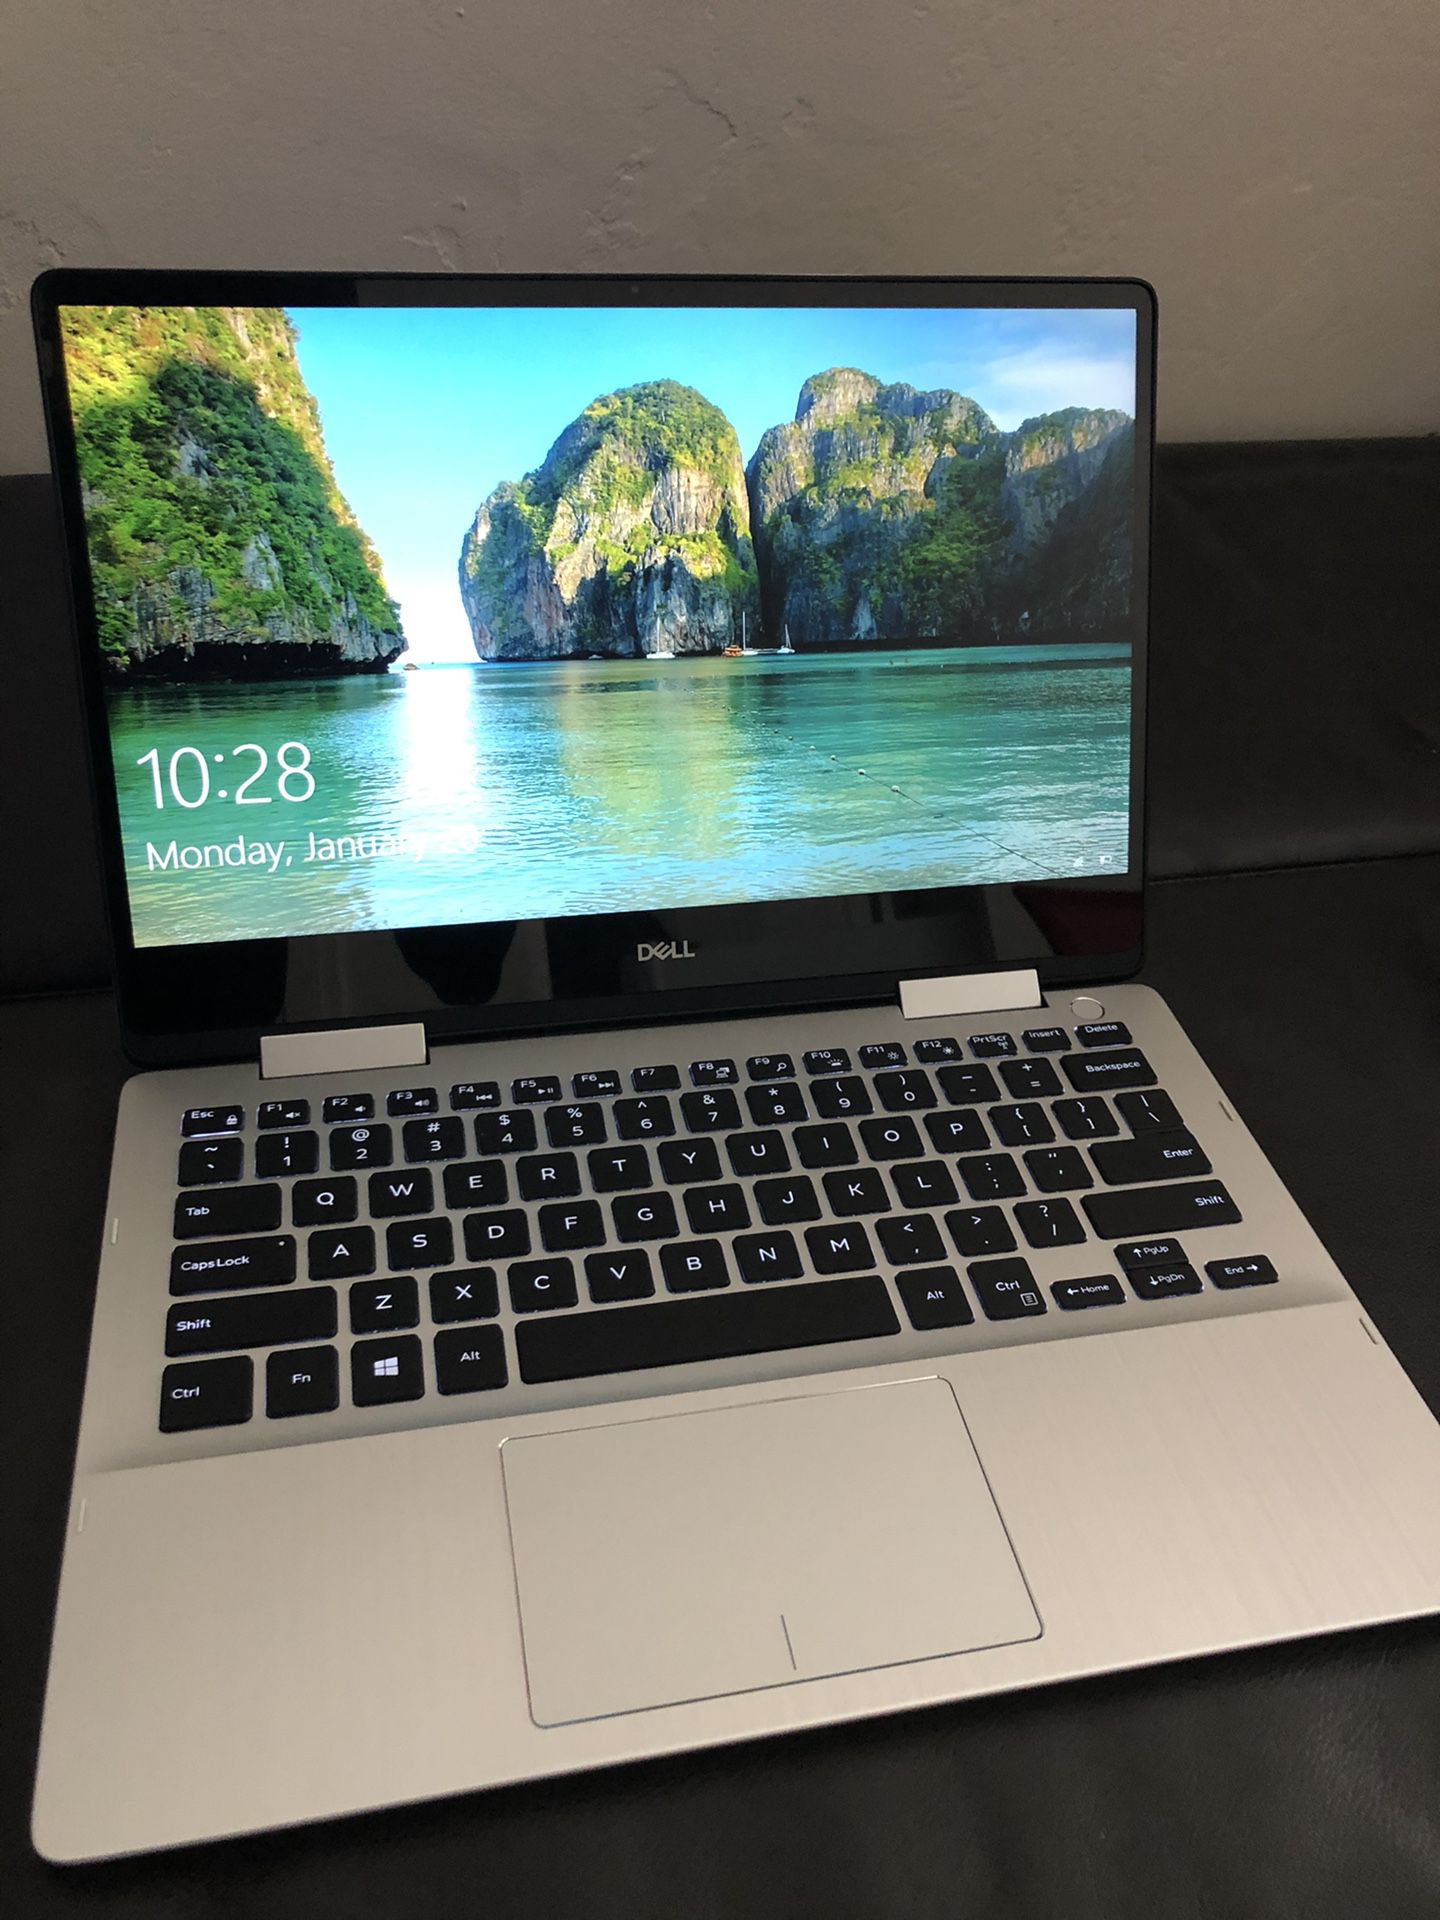 Dell Inspiron 13 7000 intel i5 2-in-1 laptop and tablet